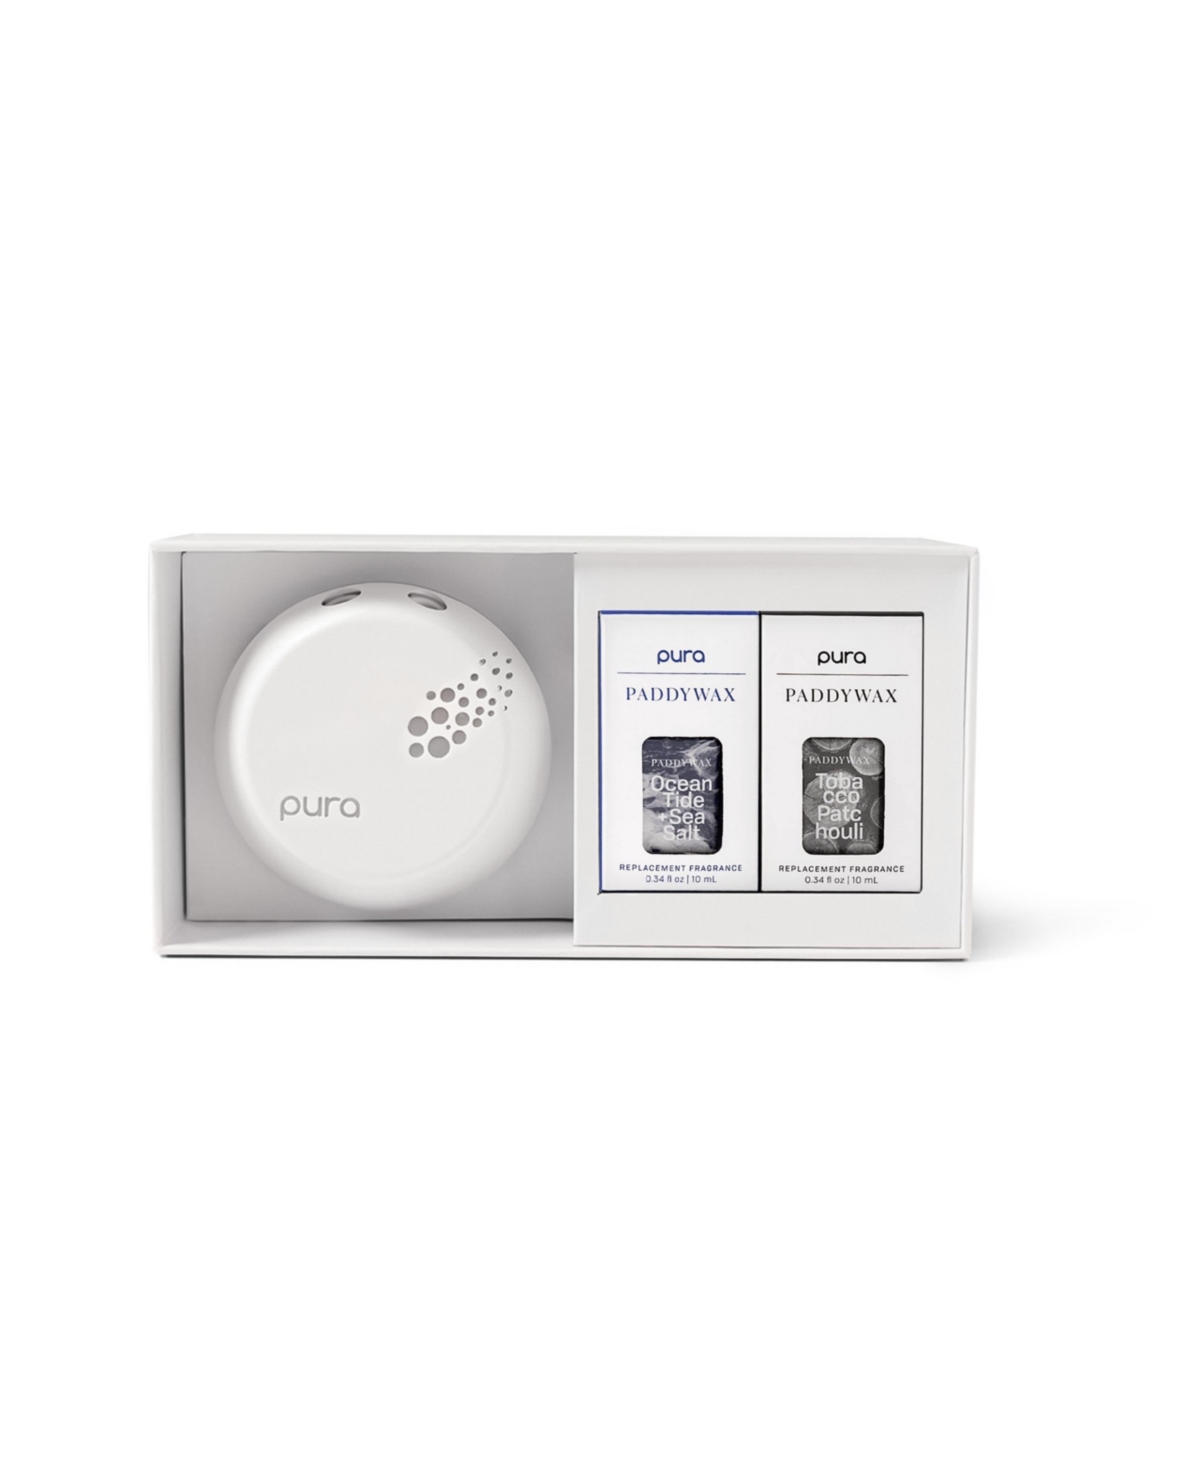 and Paddywax - Smart Home Fragrance Device Starter Set - White